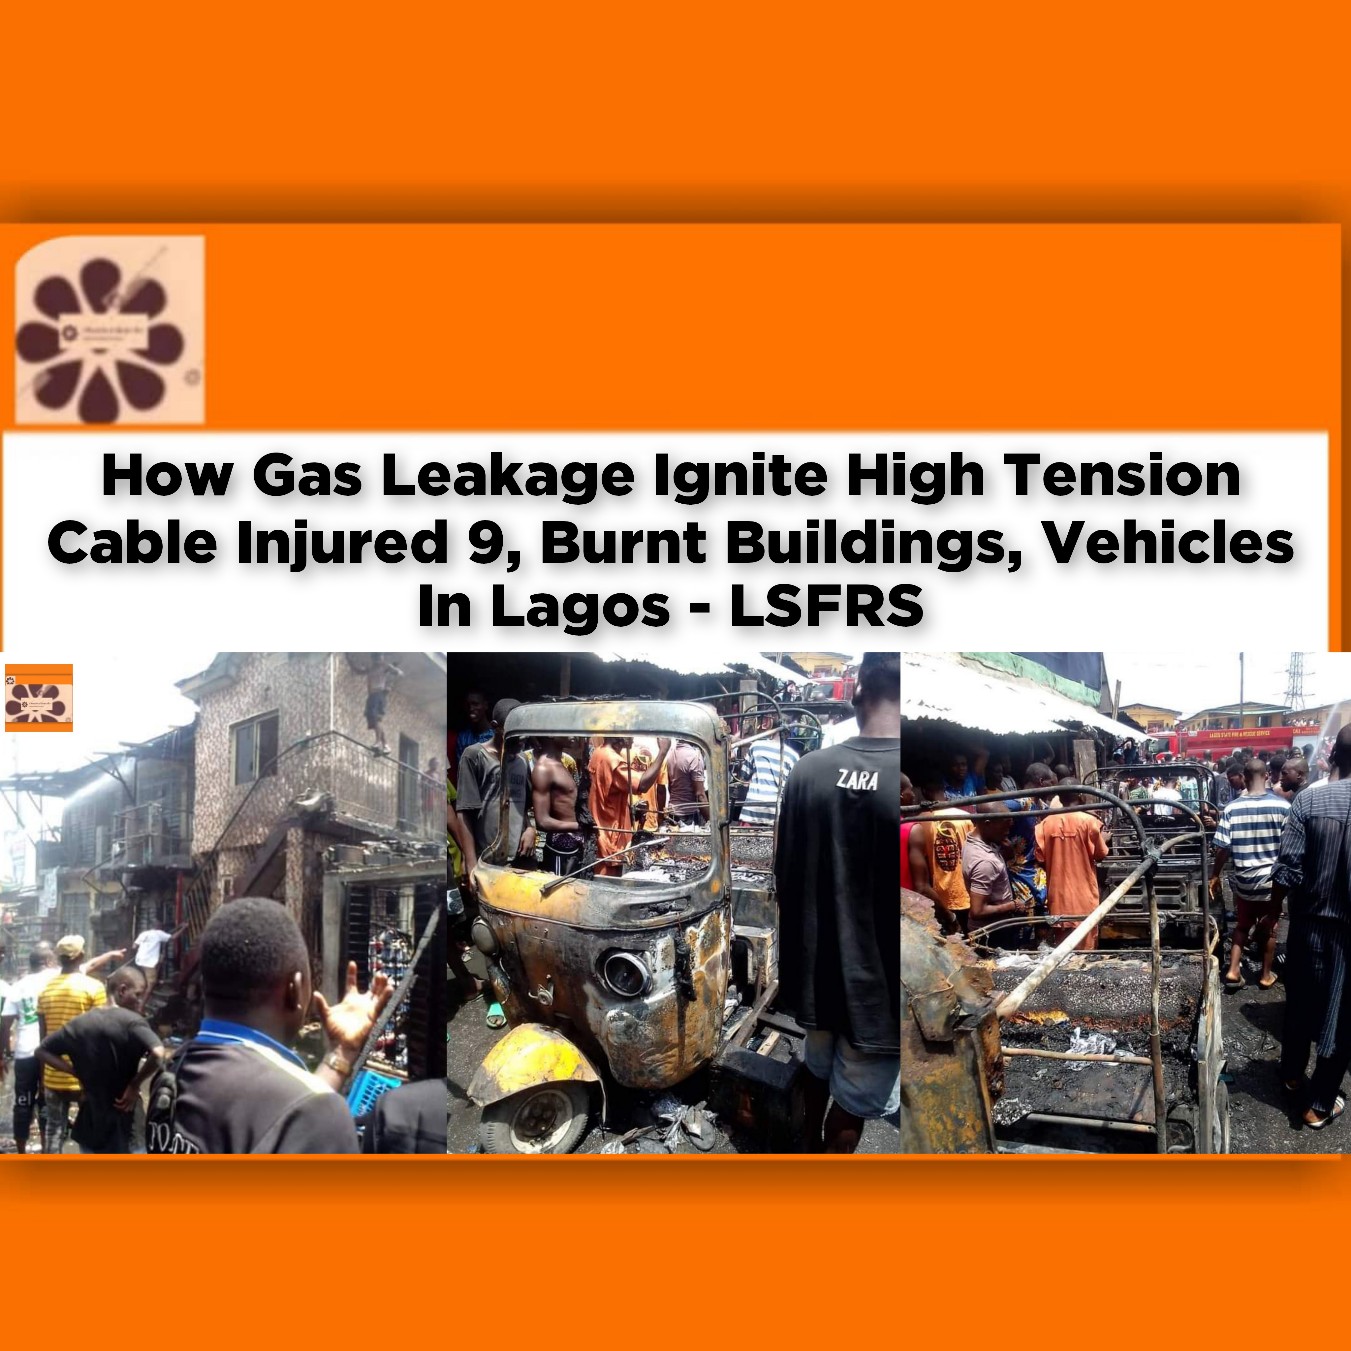 How Gas Leakage Ignite High Tension Cable Injured 9, Burnt Buildings, Vehicles In Lagos - LSFRS ~ OsazuwaAkonedo #Doctors